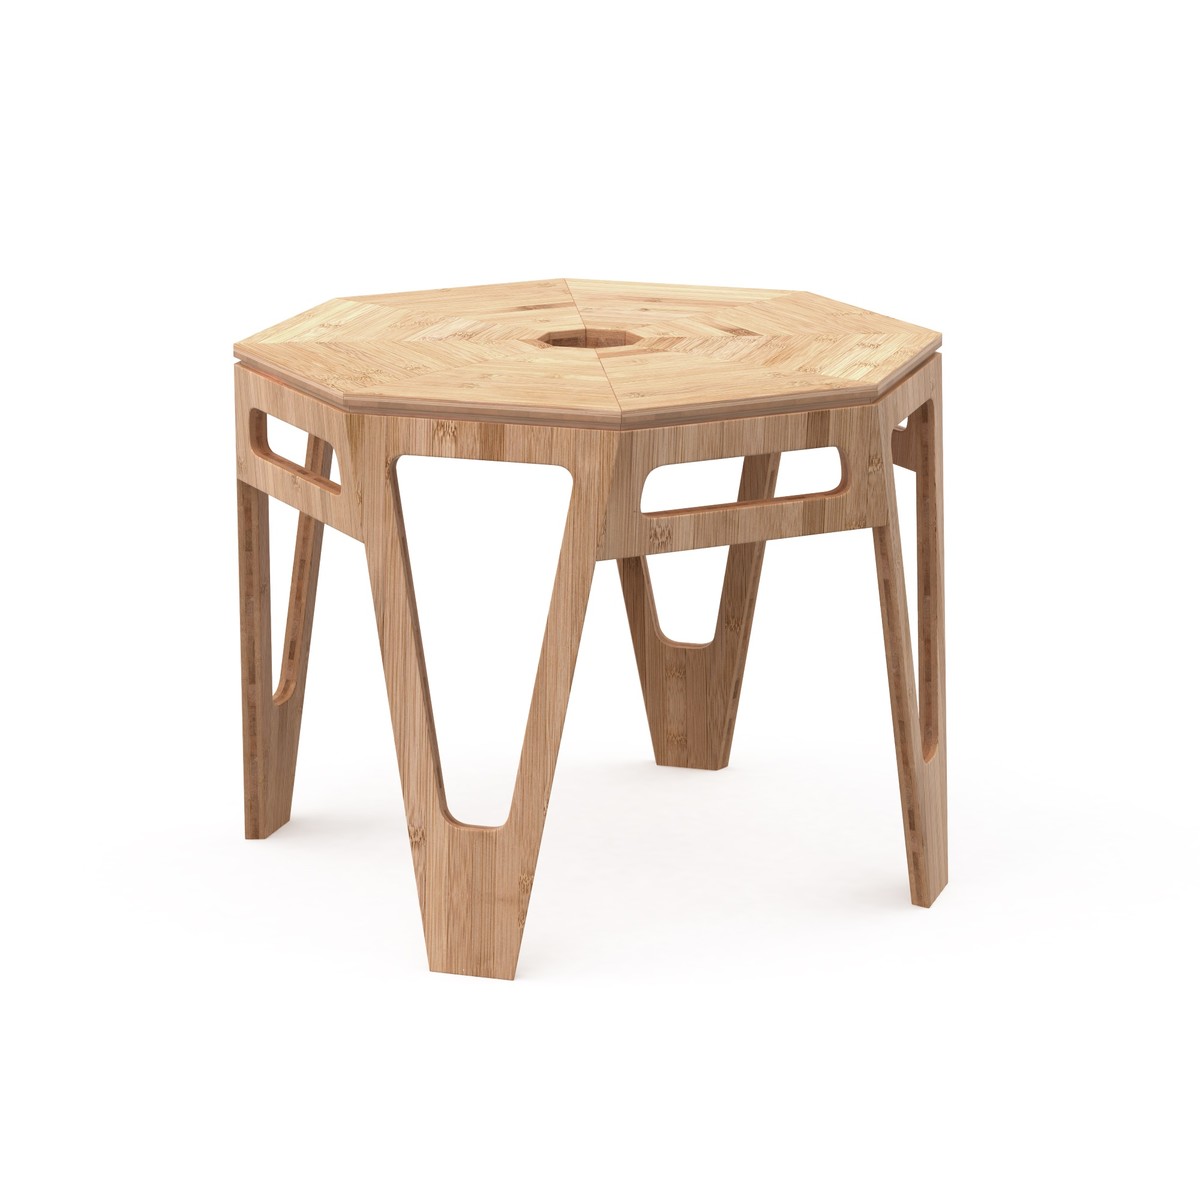 Octagon side table